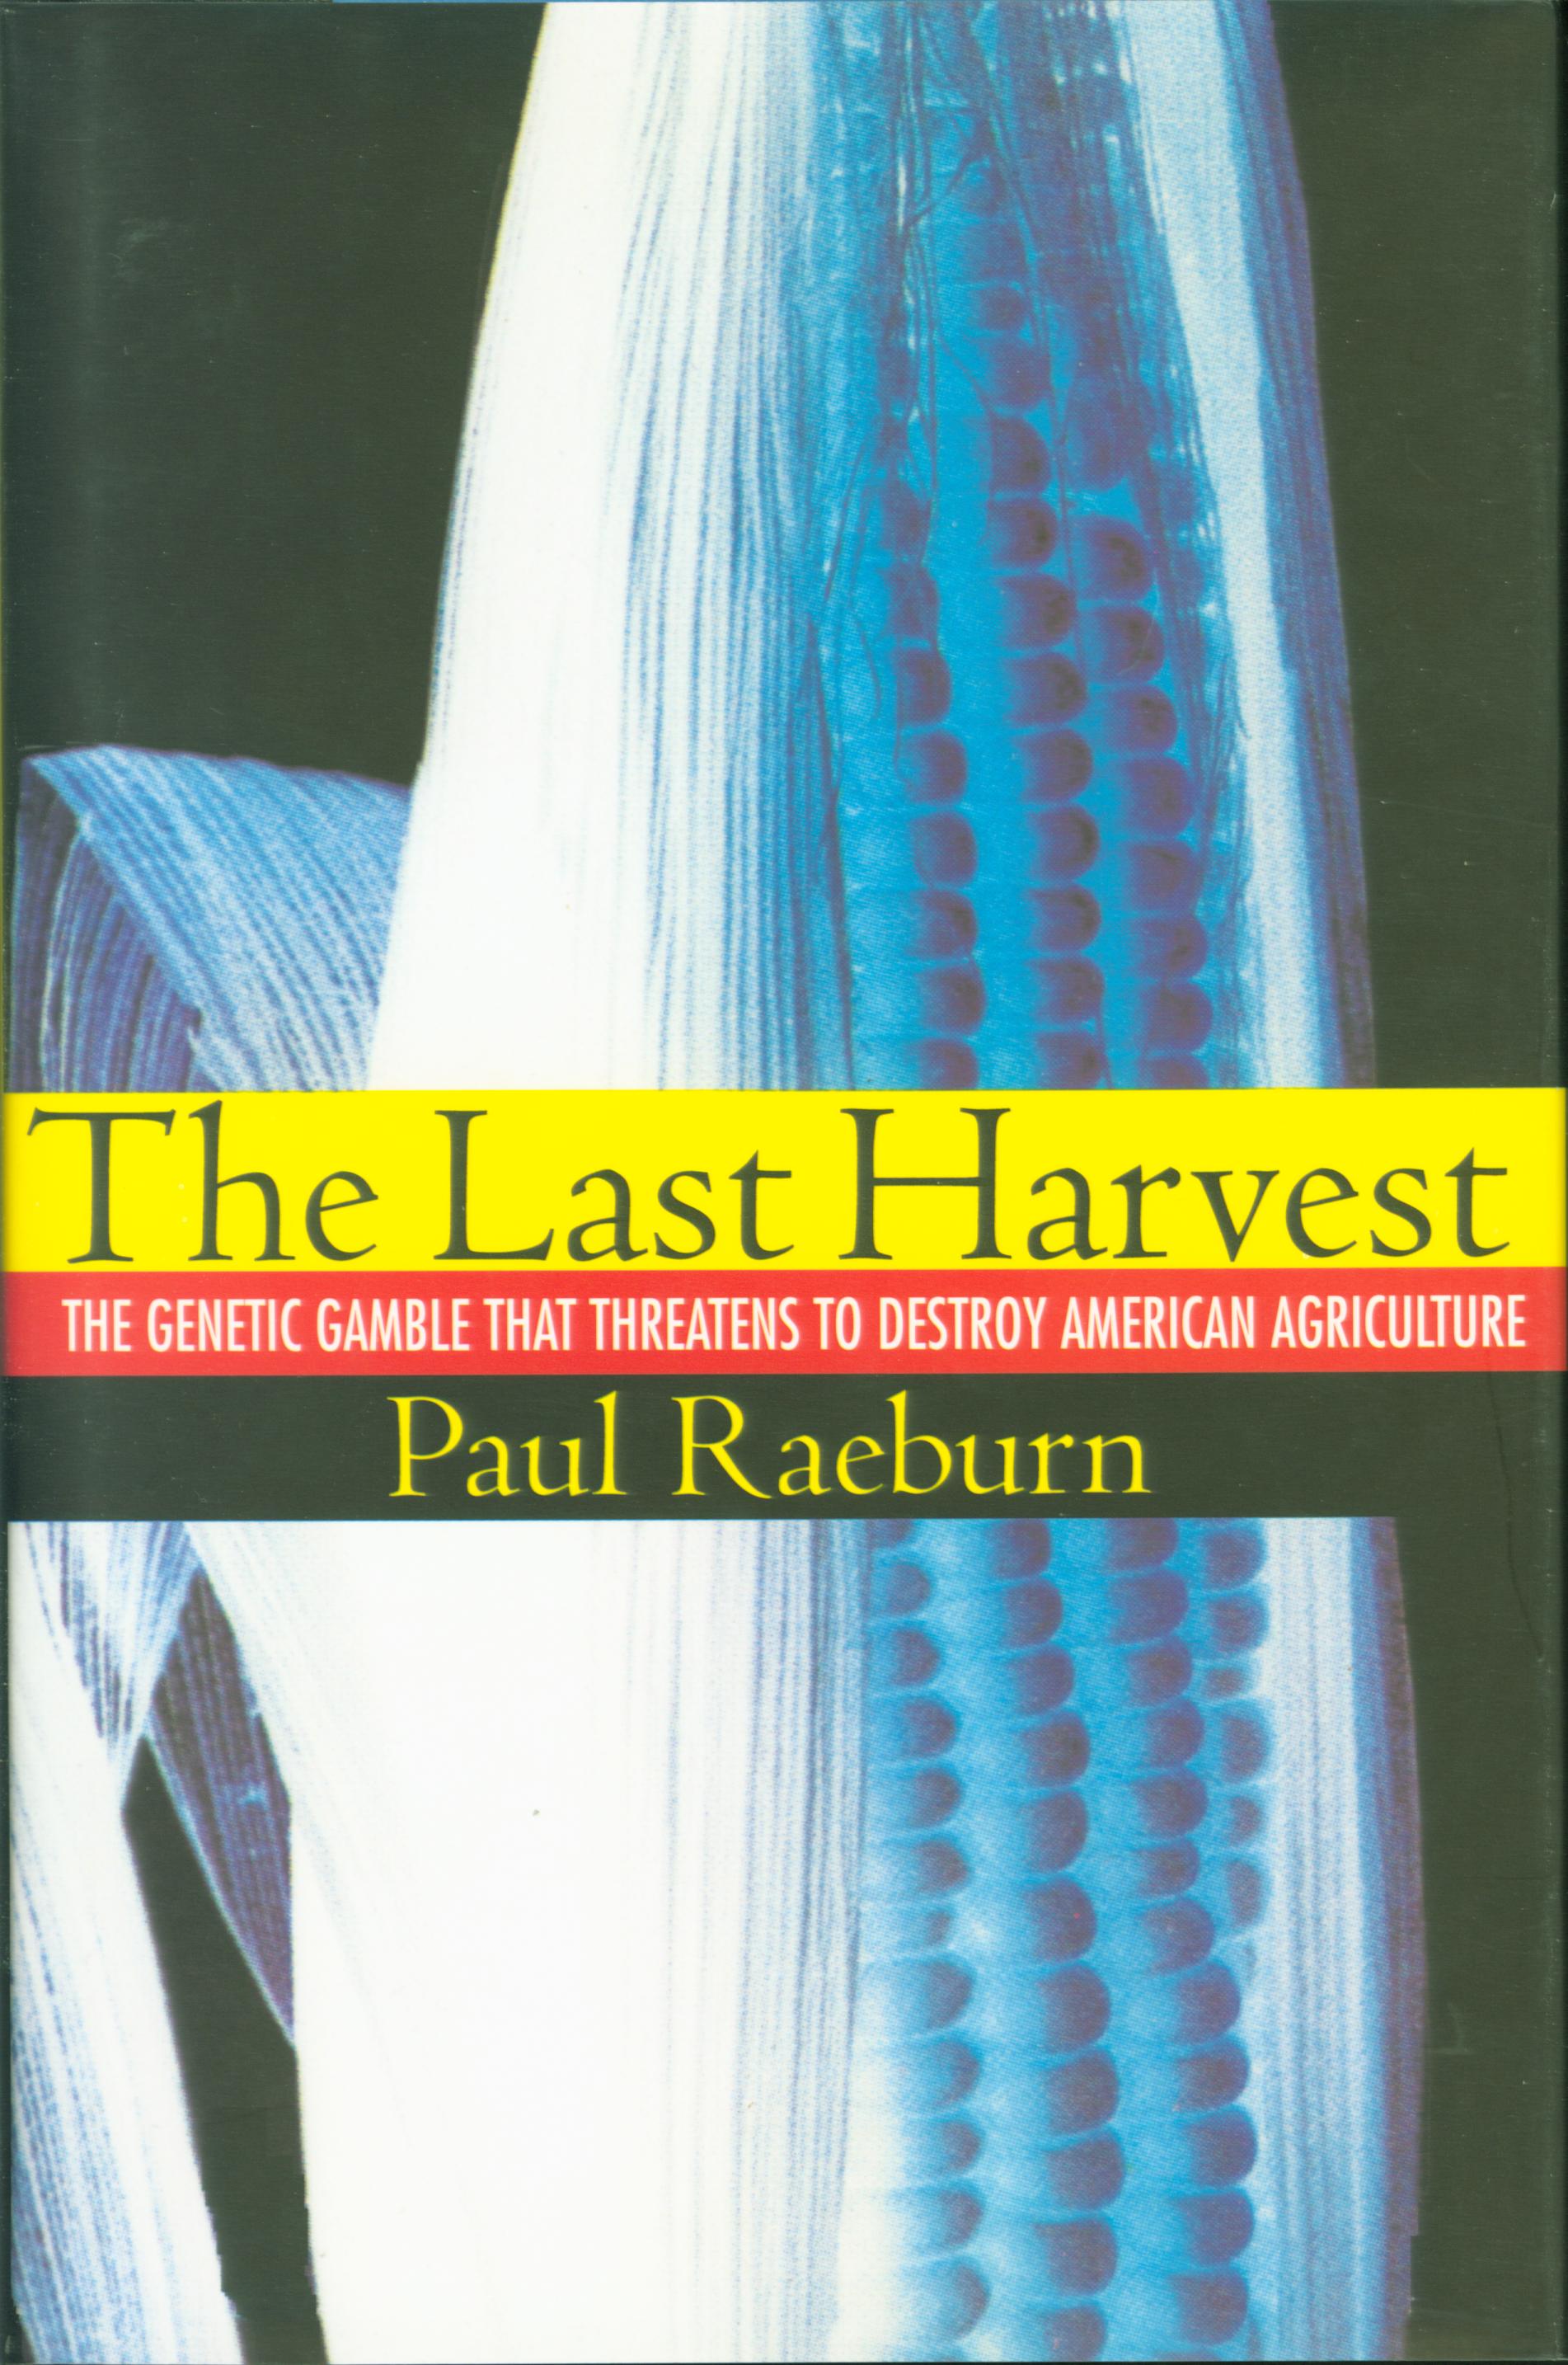 HE LAST HARVEST: the genetic gamble that threatens to destroy American agriculture. 